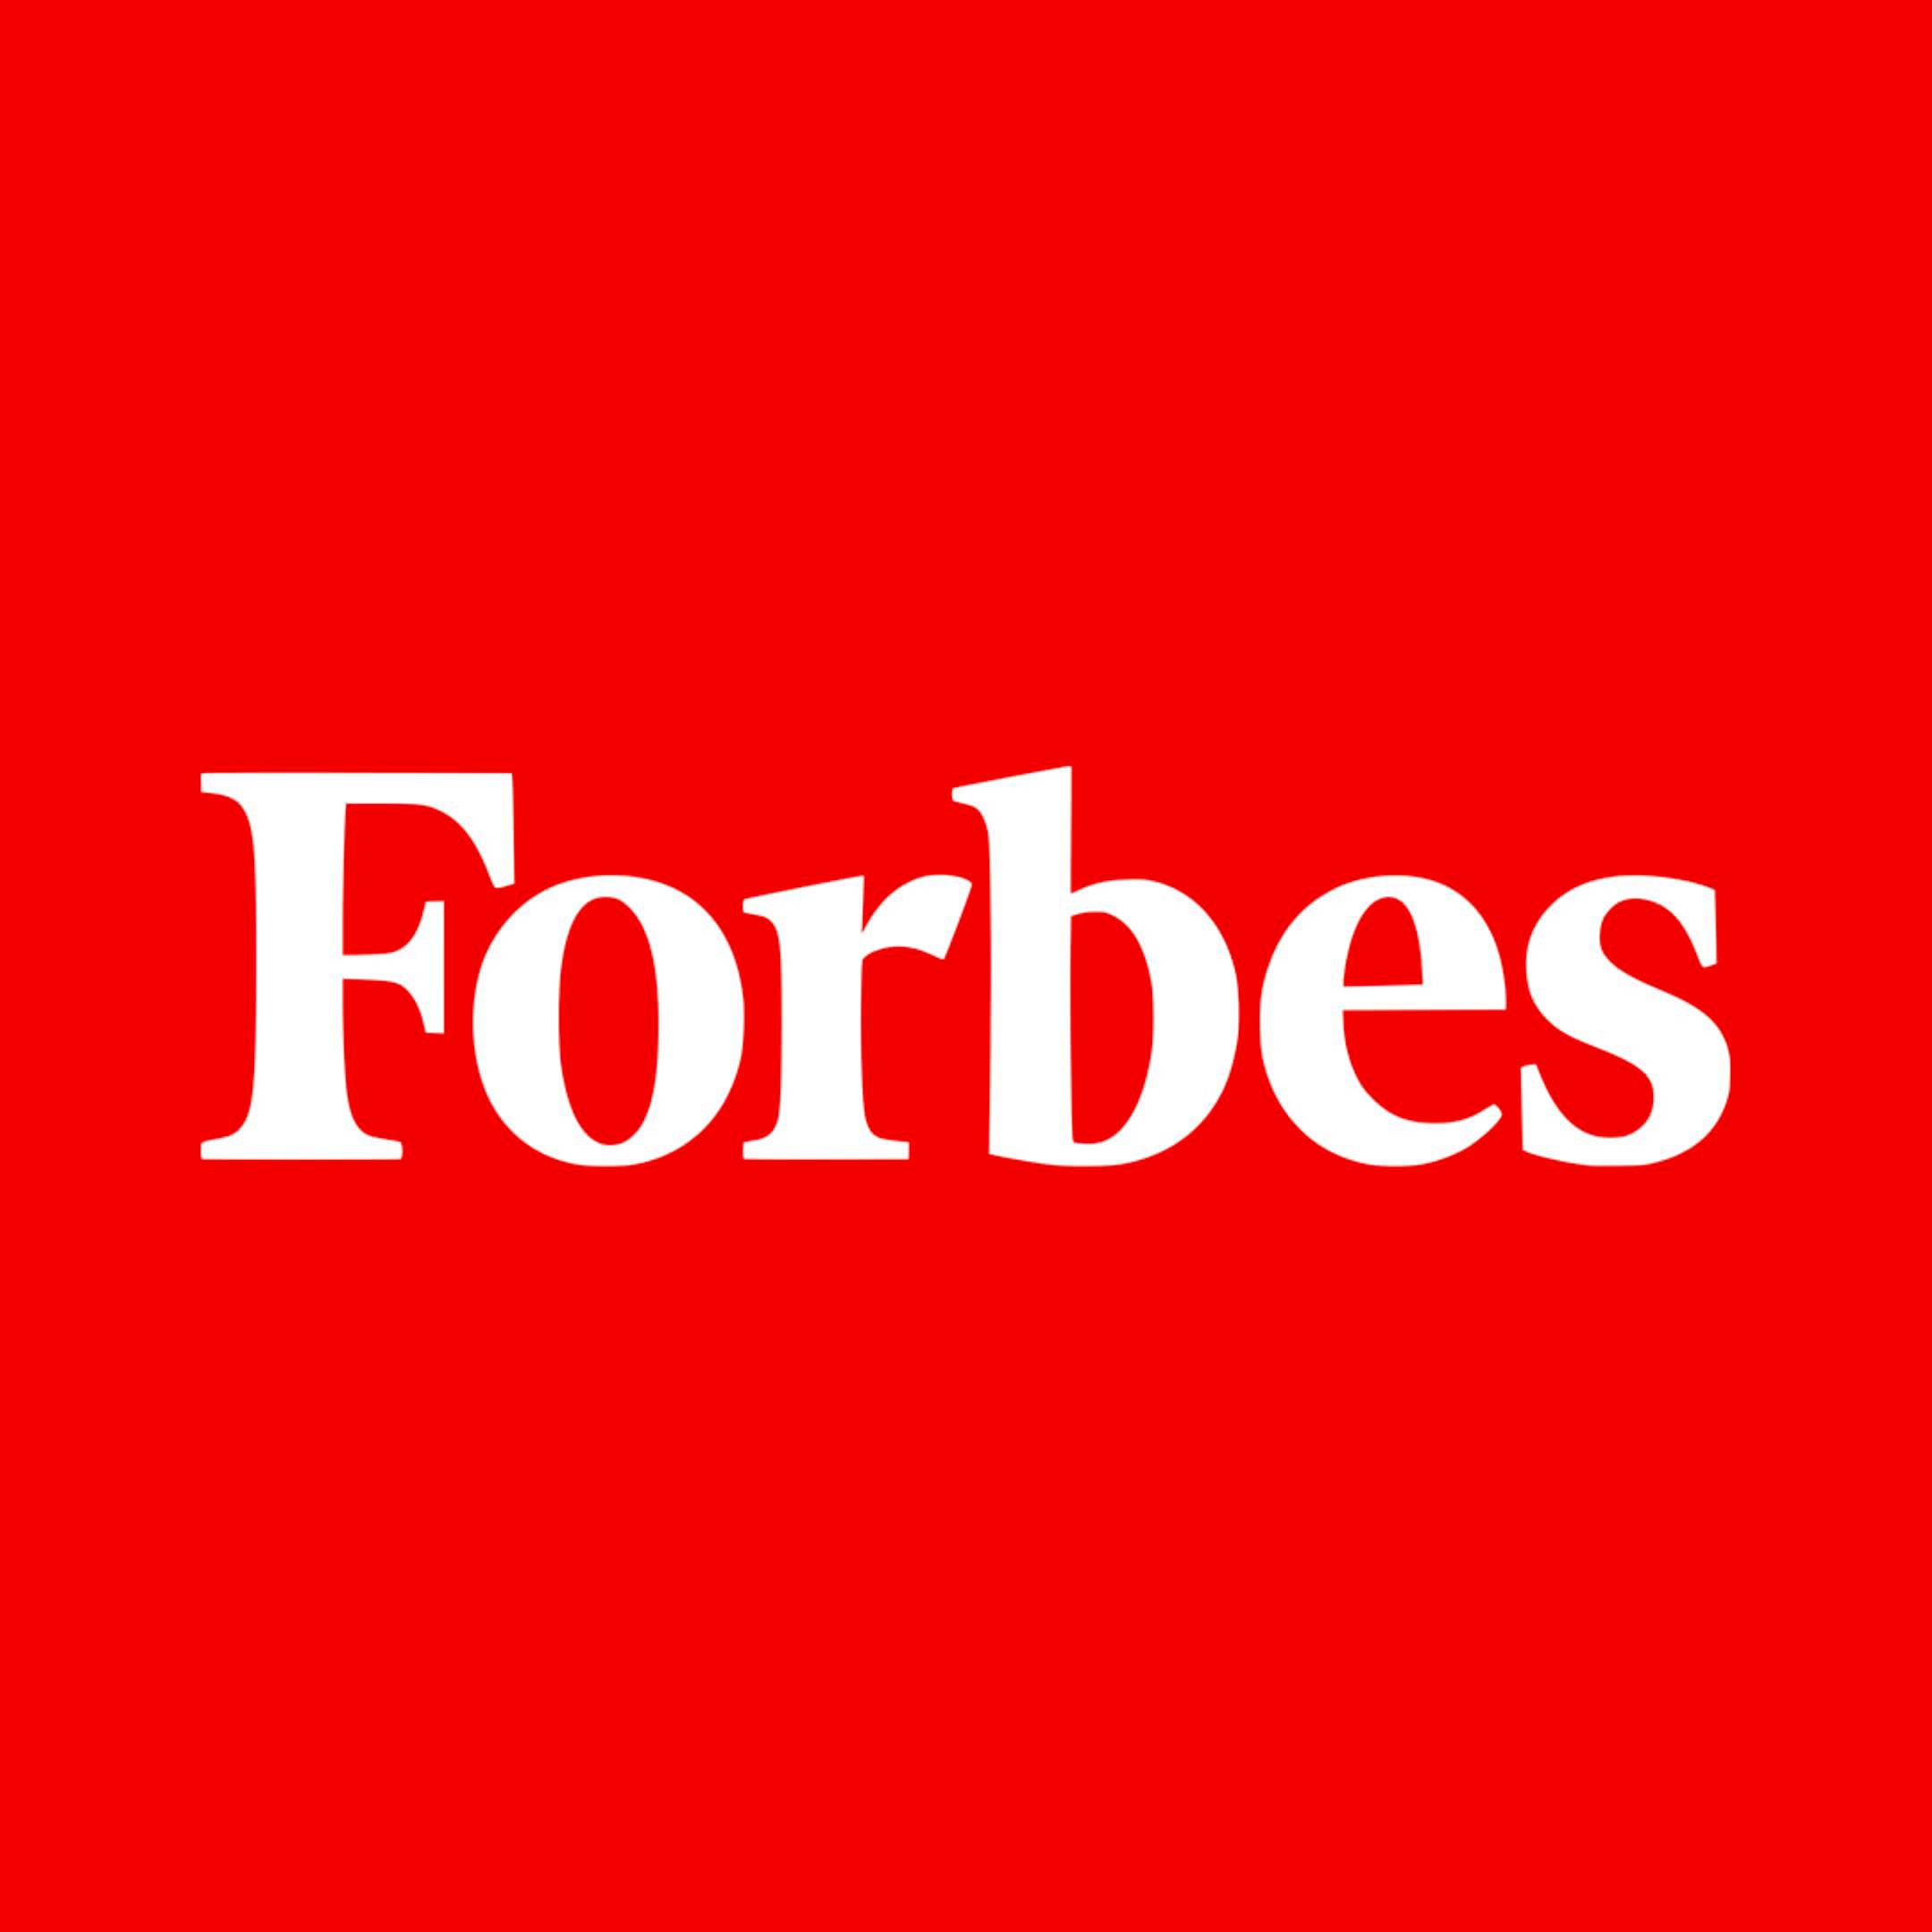 Forbes logo on red background 